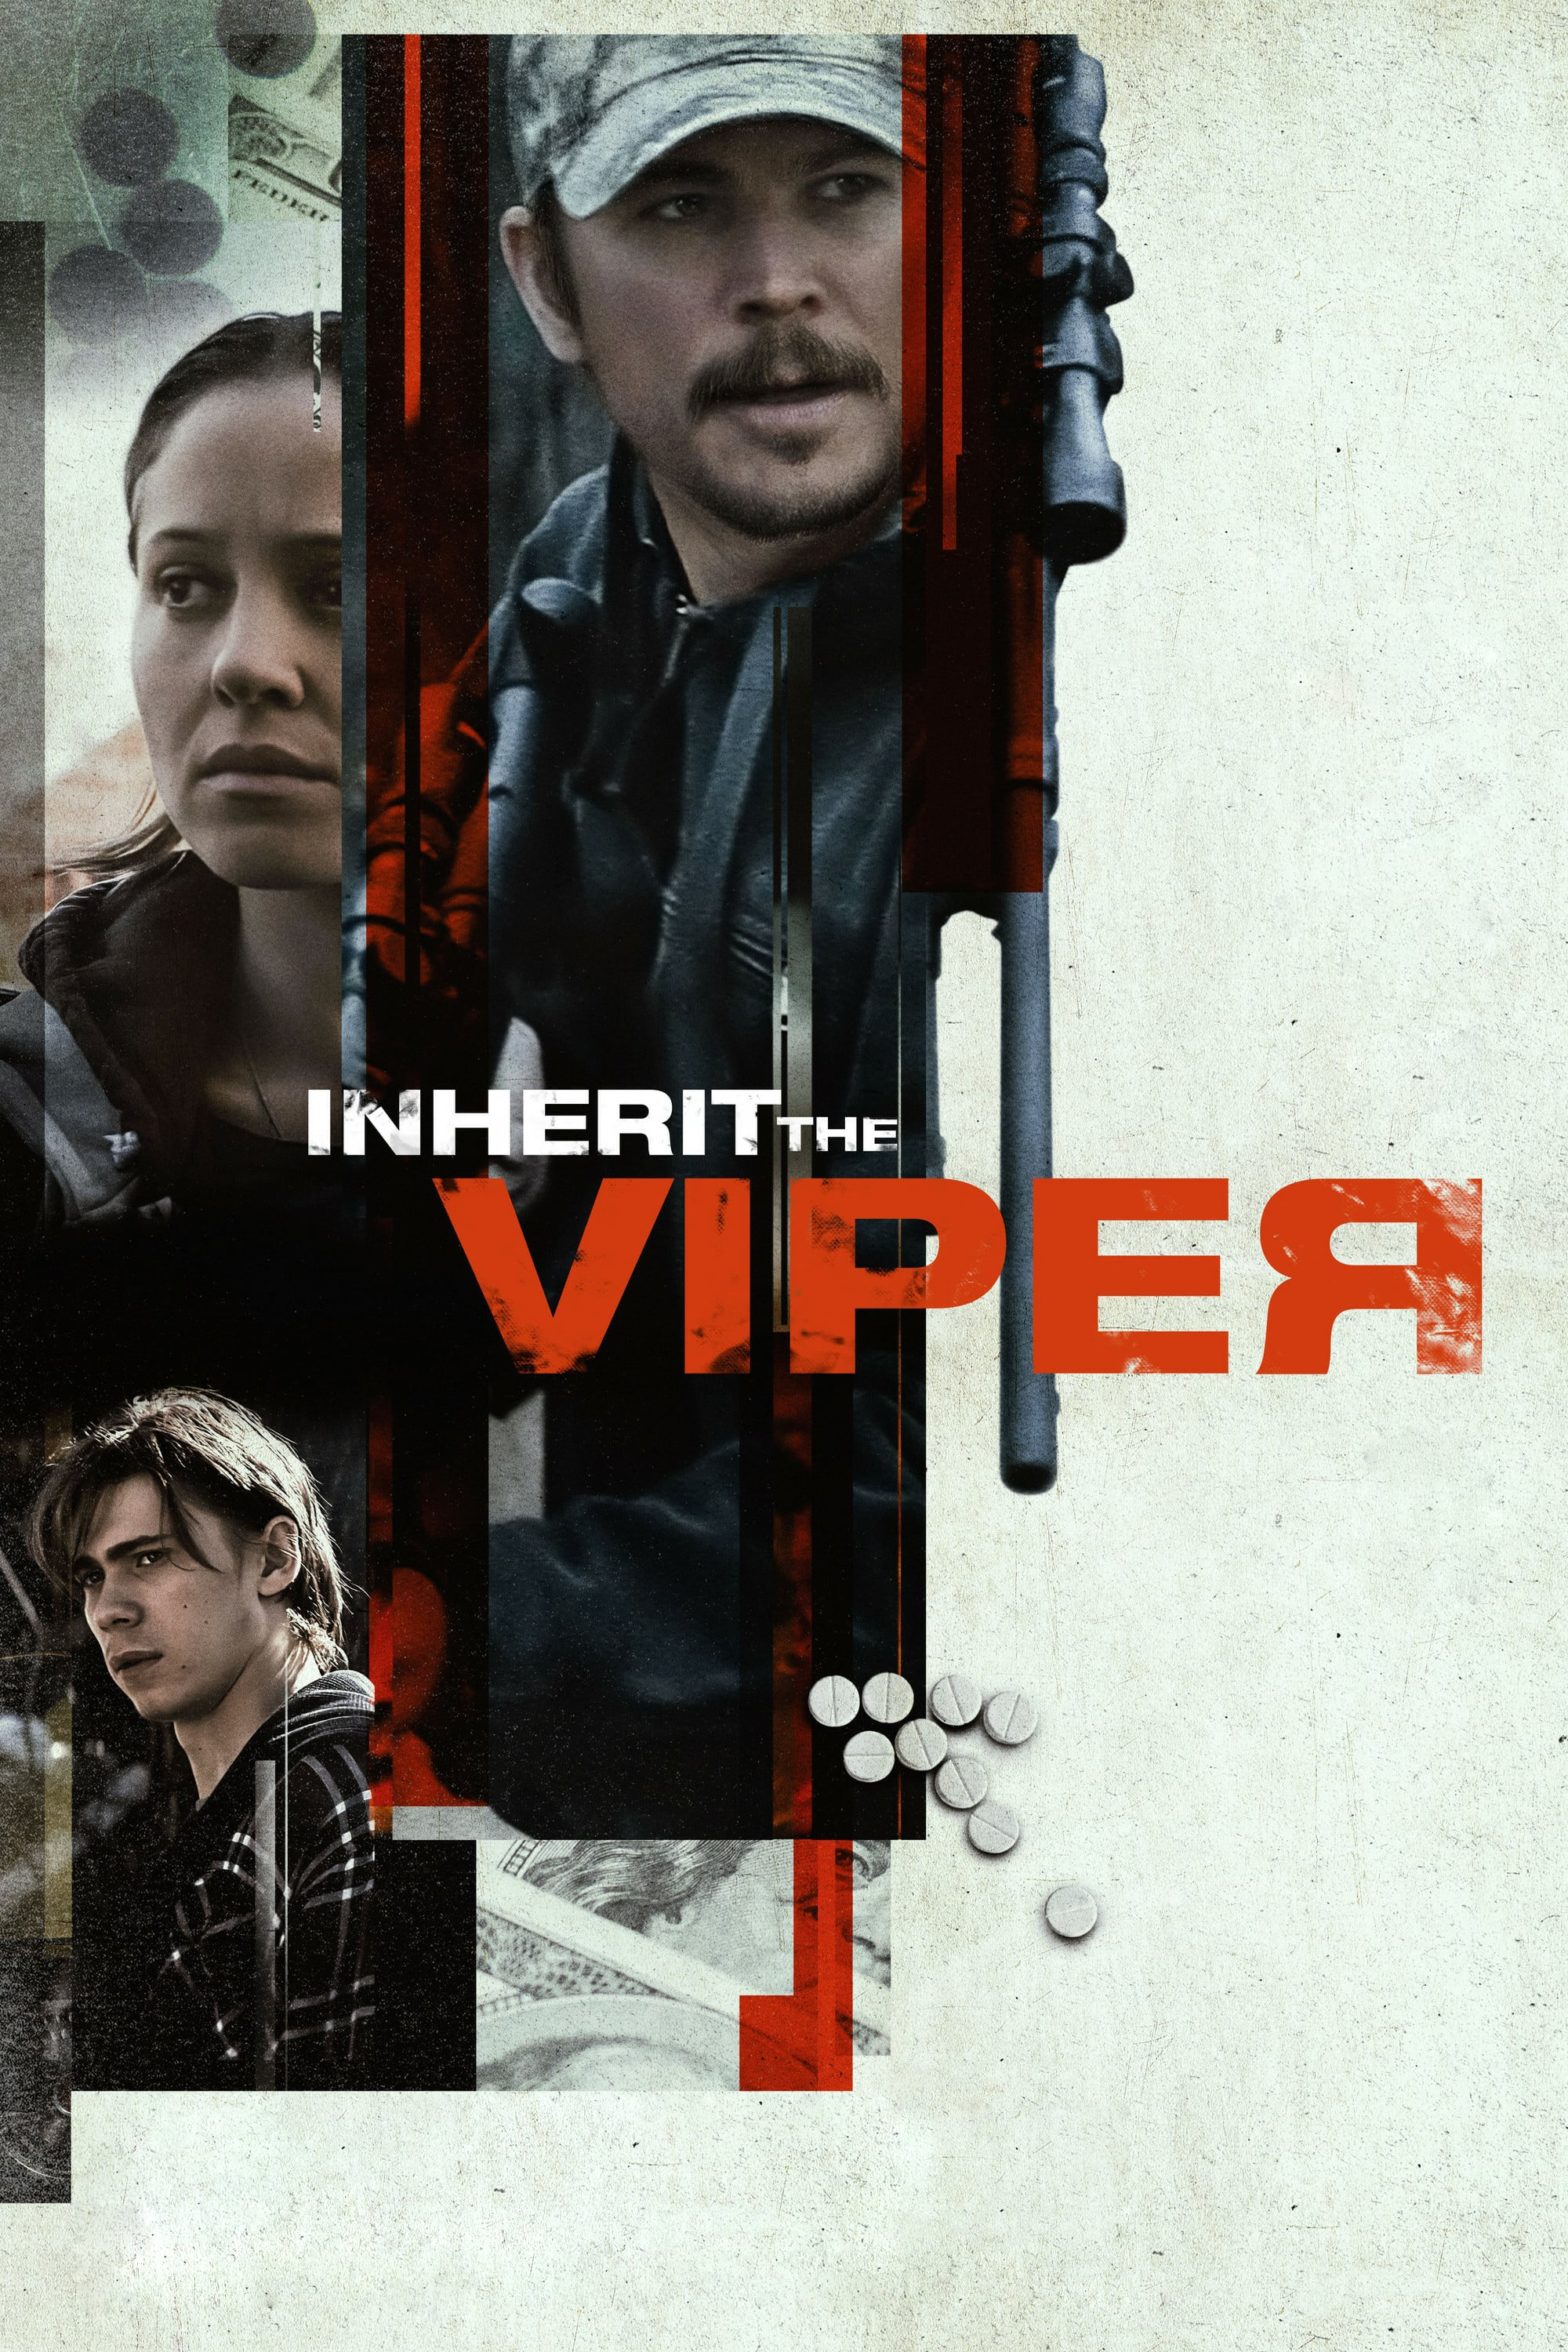 Poster for the movie "Inherit the Viper"